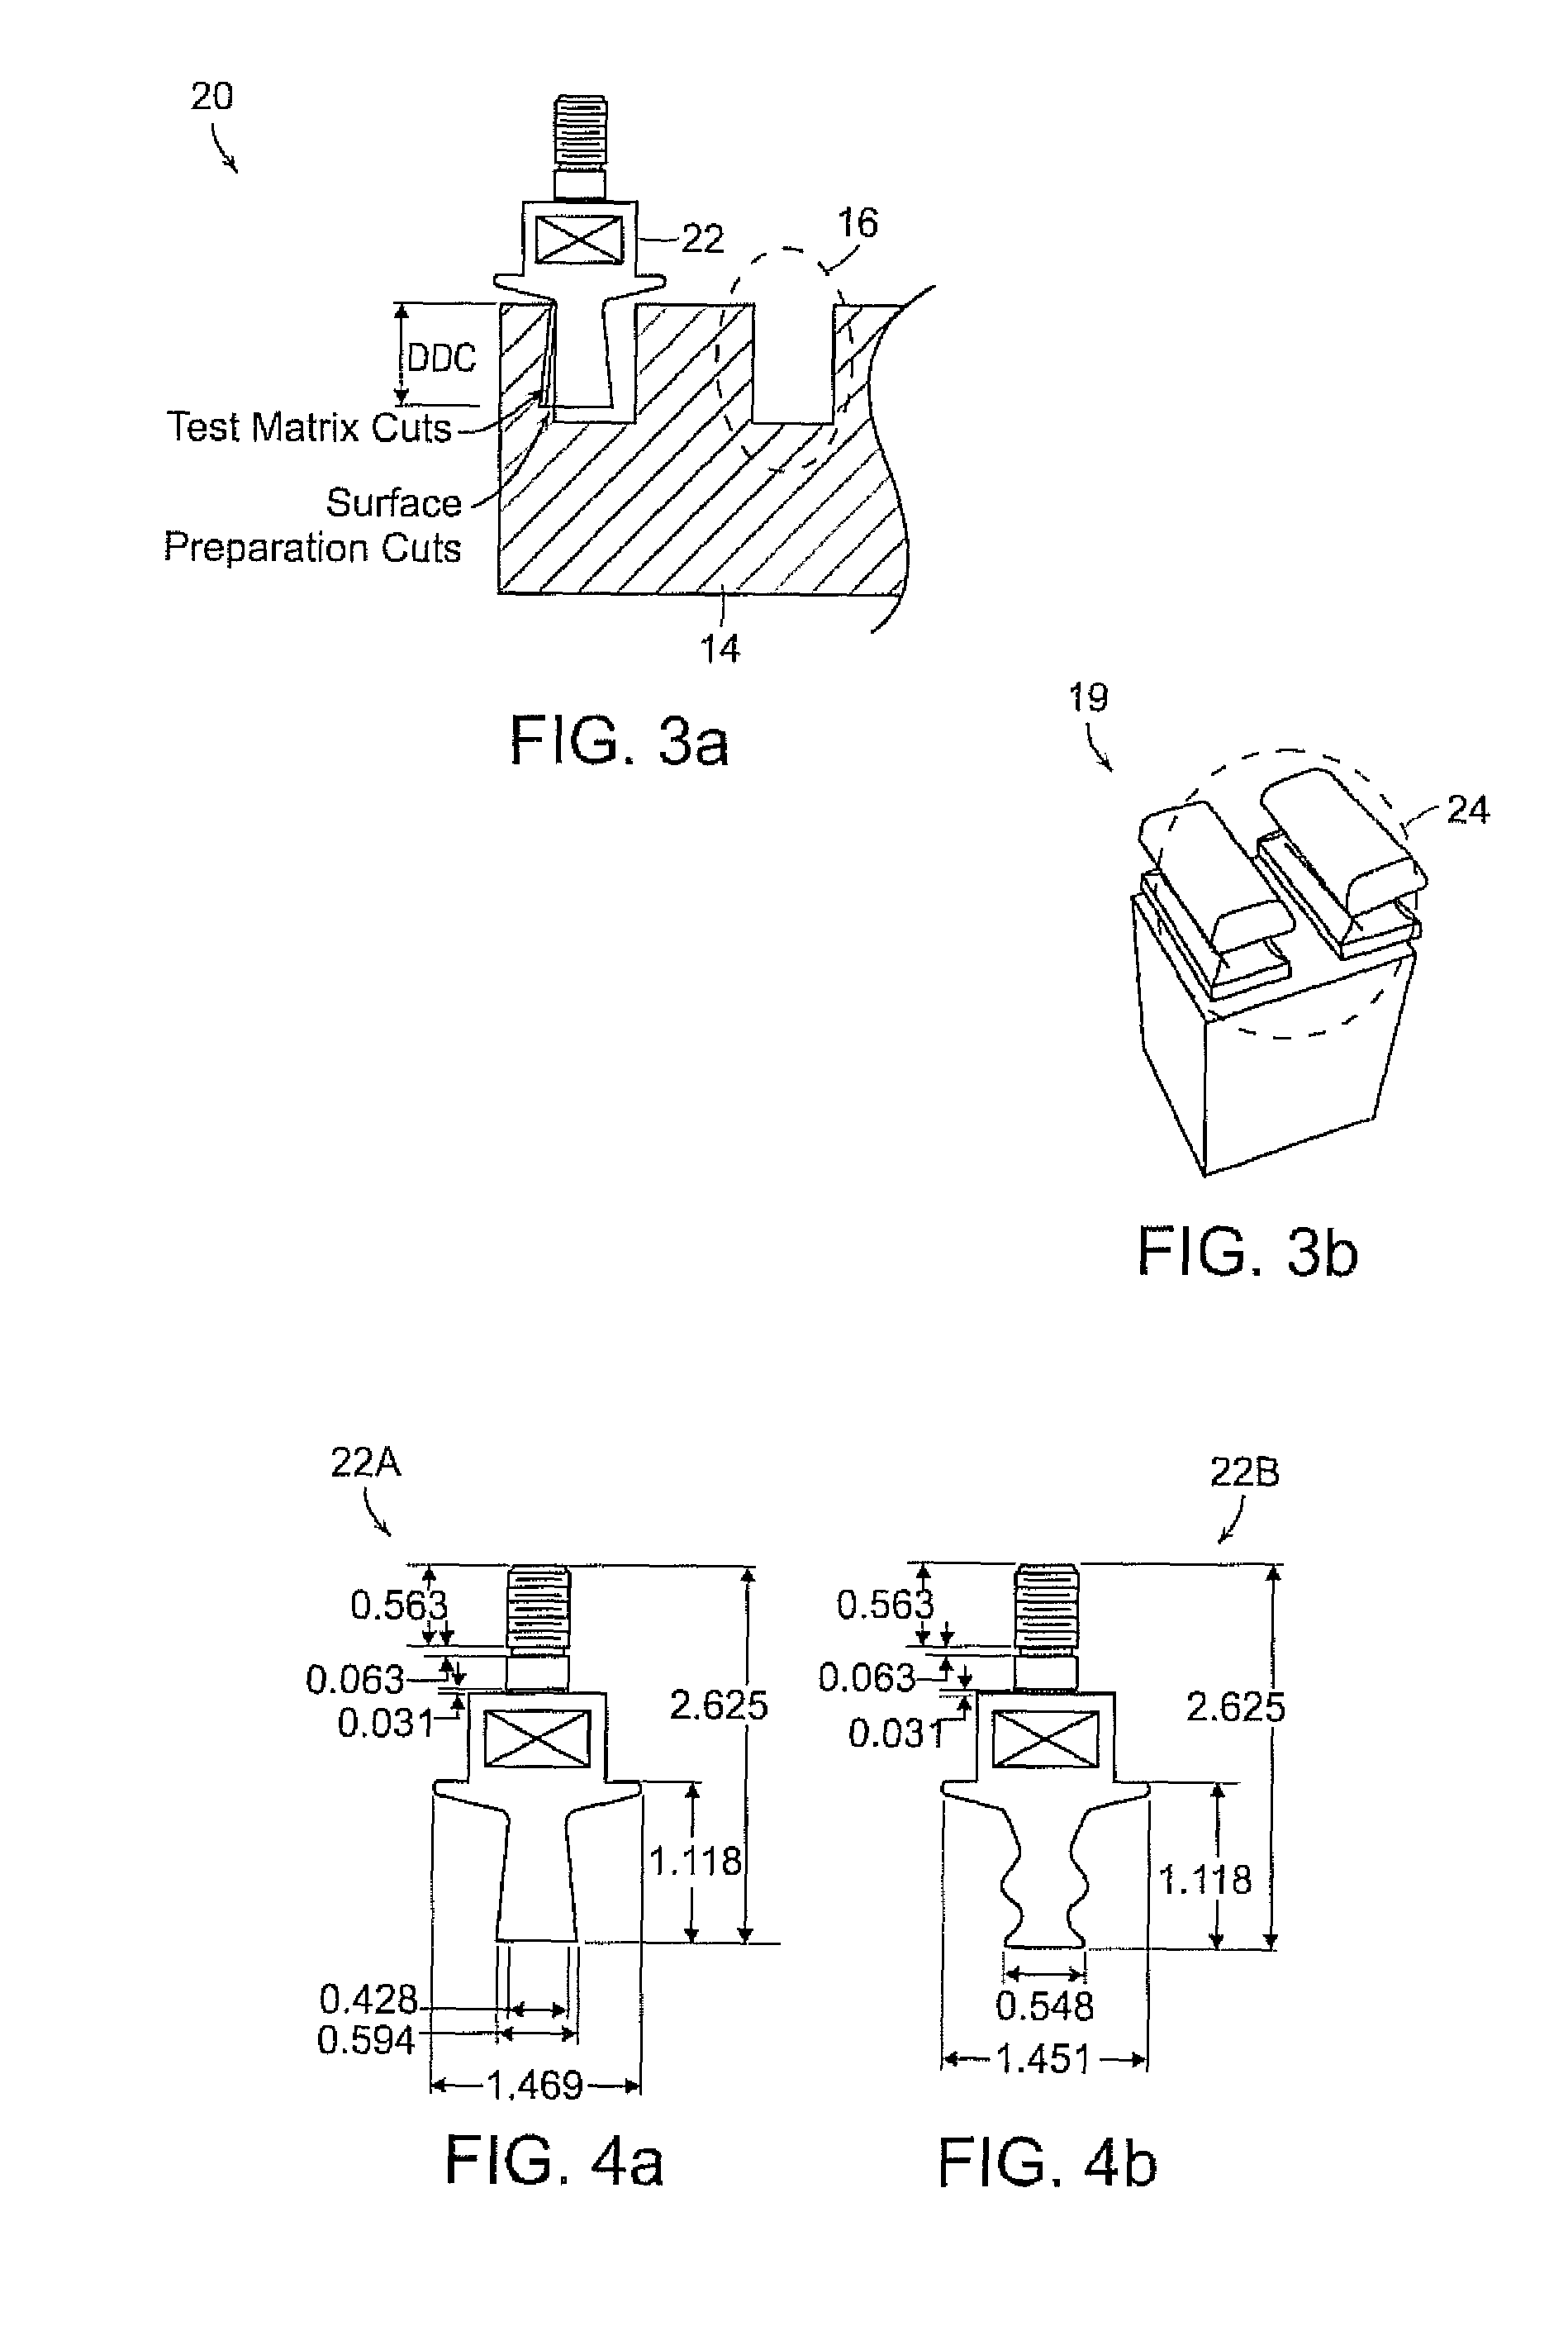 Method for grinding complex shapes